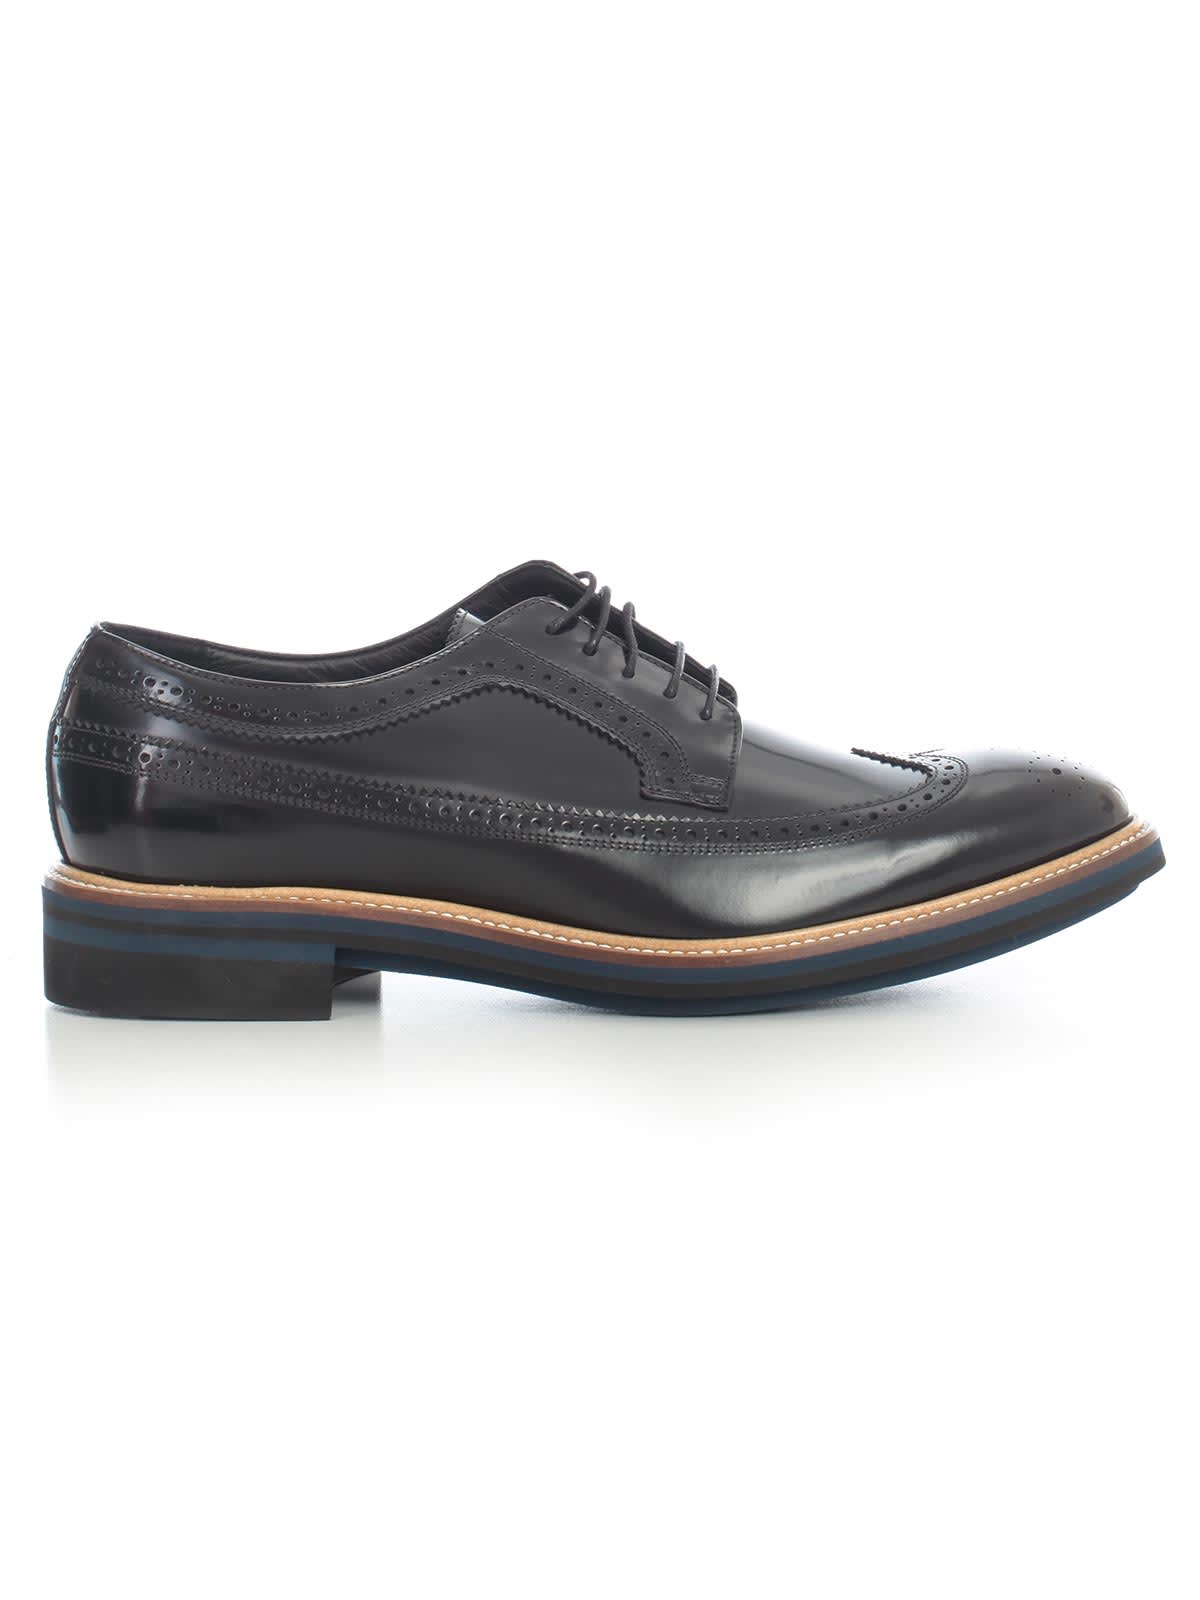 PAUL SMITH CLASSIC SHOES CHASE,11221143